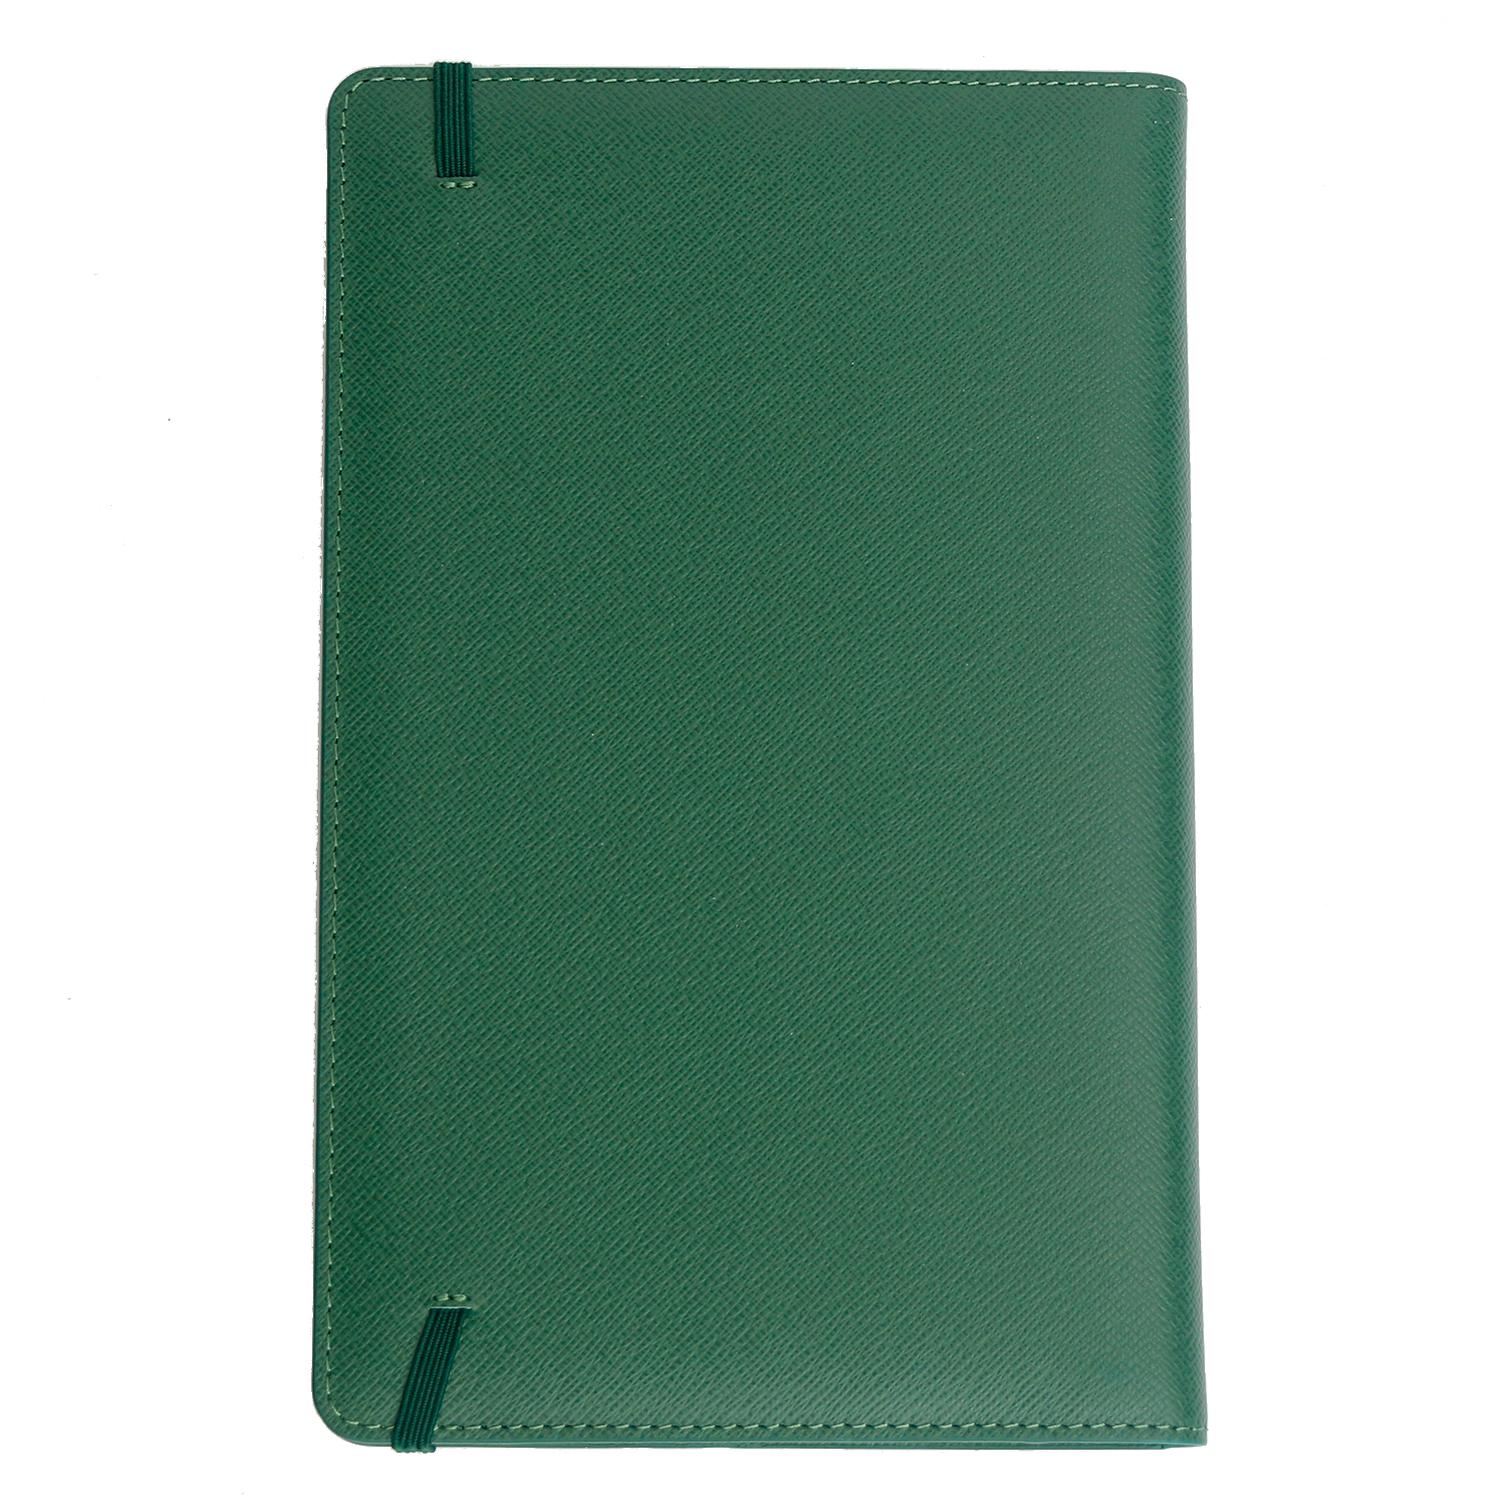 Rolex Agenda with Green Leather Cover  - Green Saffiano leather Rolex agenda cover with tonal stitching throughout, 2 small slit pockets, embossed brand stamp at cover and elasticized closure at edge. Includes hardcover notebook insert.
Length 8.8